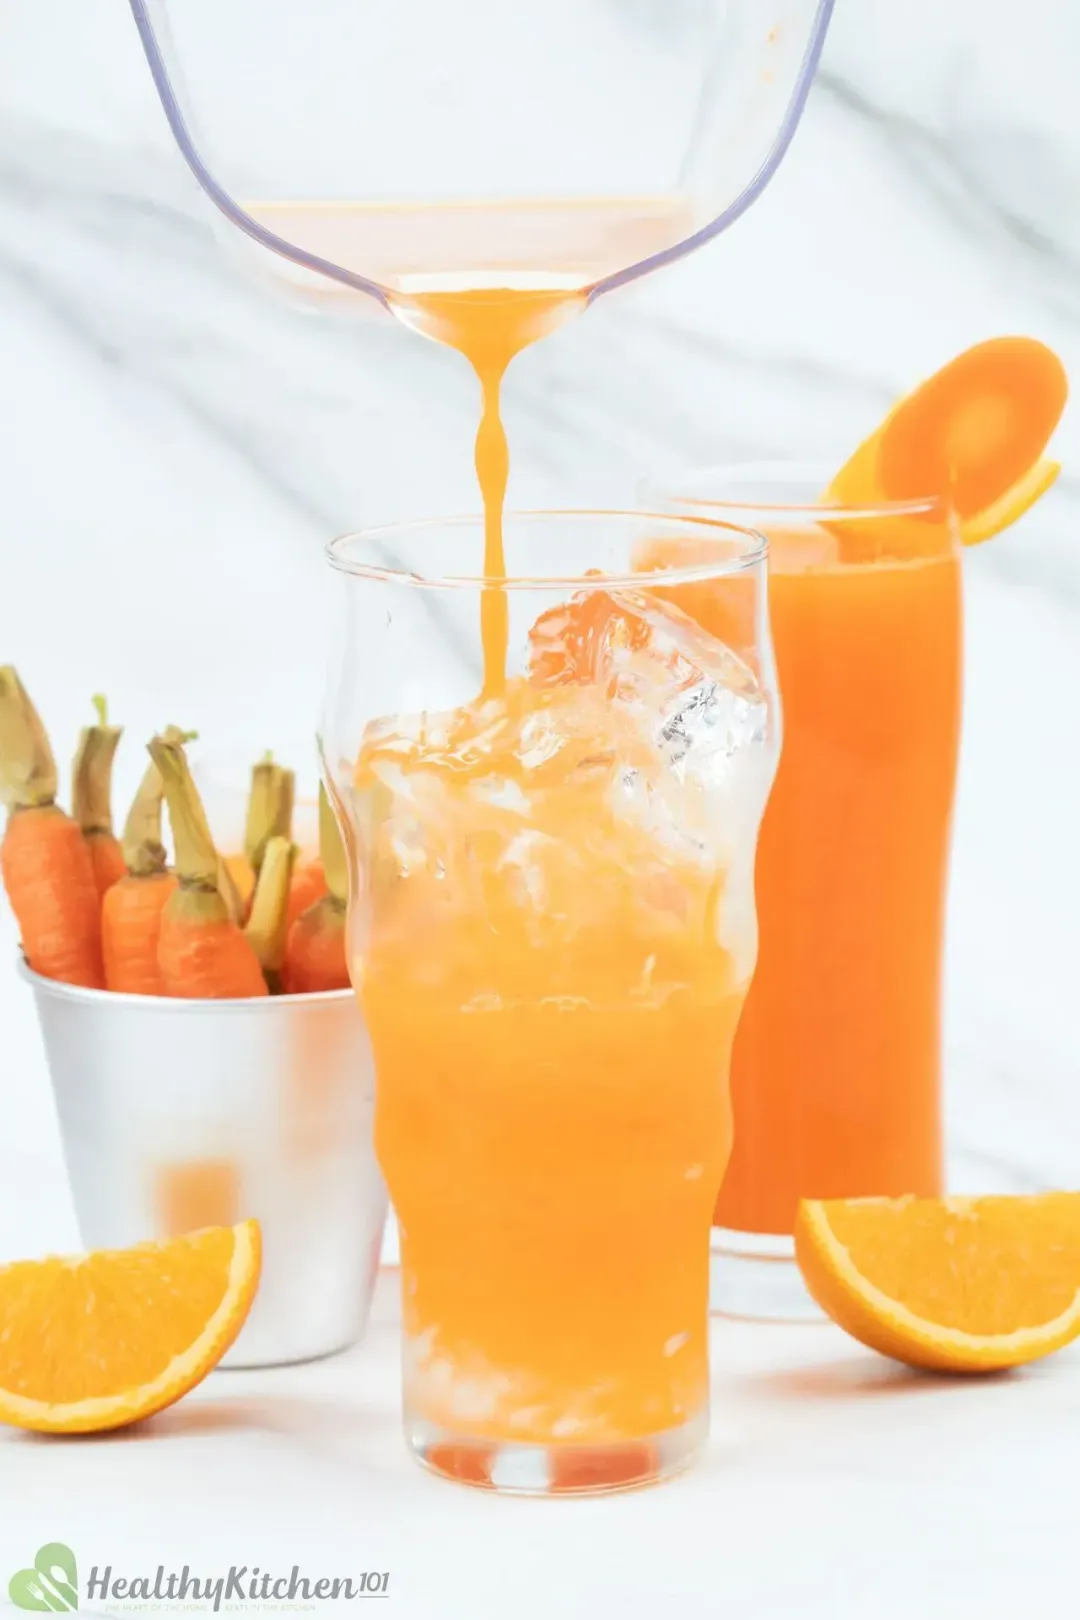 A glass pitcher pouring an orange drink into an iced glass, nexr to an orange glass, orange wedges, and baby carrots